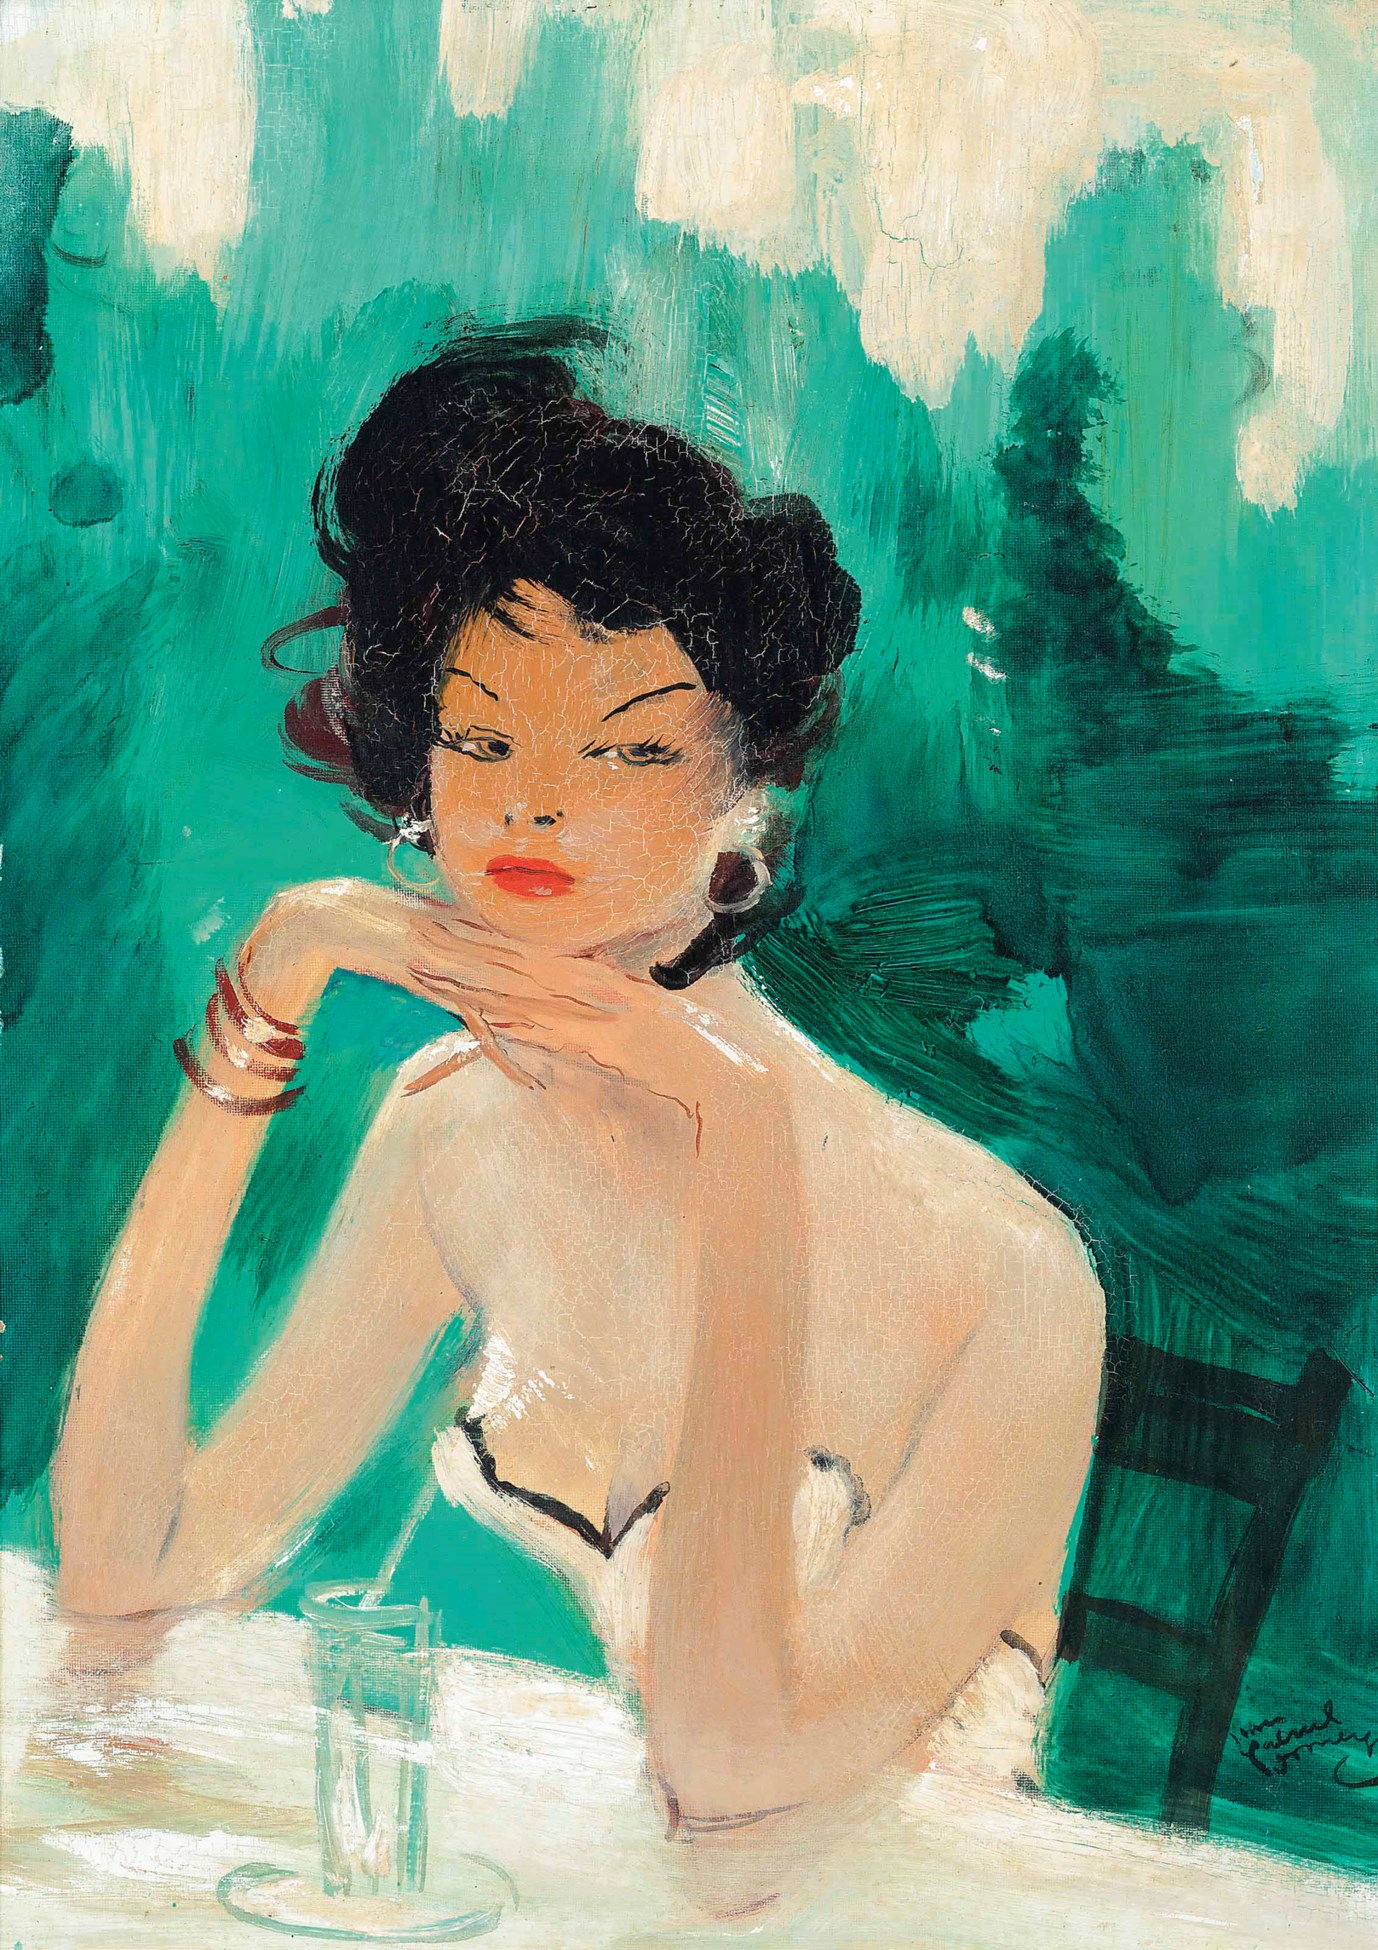 Jean-Gabriel Domergue (French, 1889-1962), At the bar. Christie's.jpg